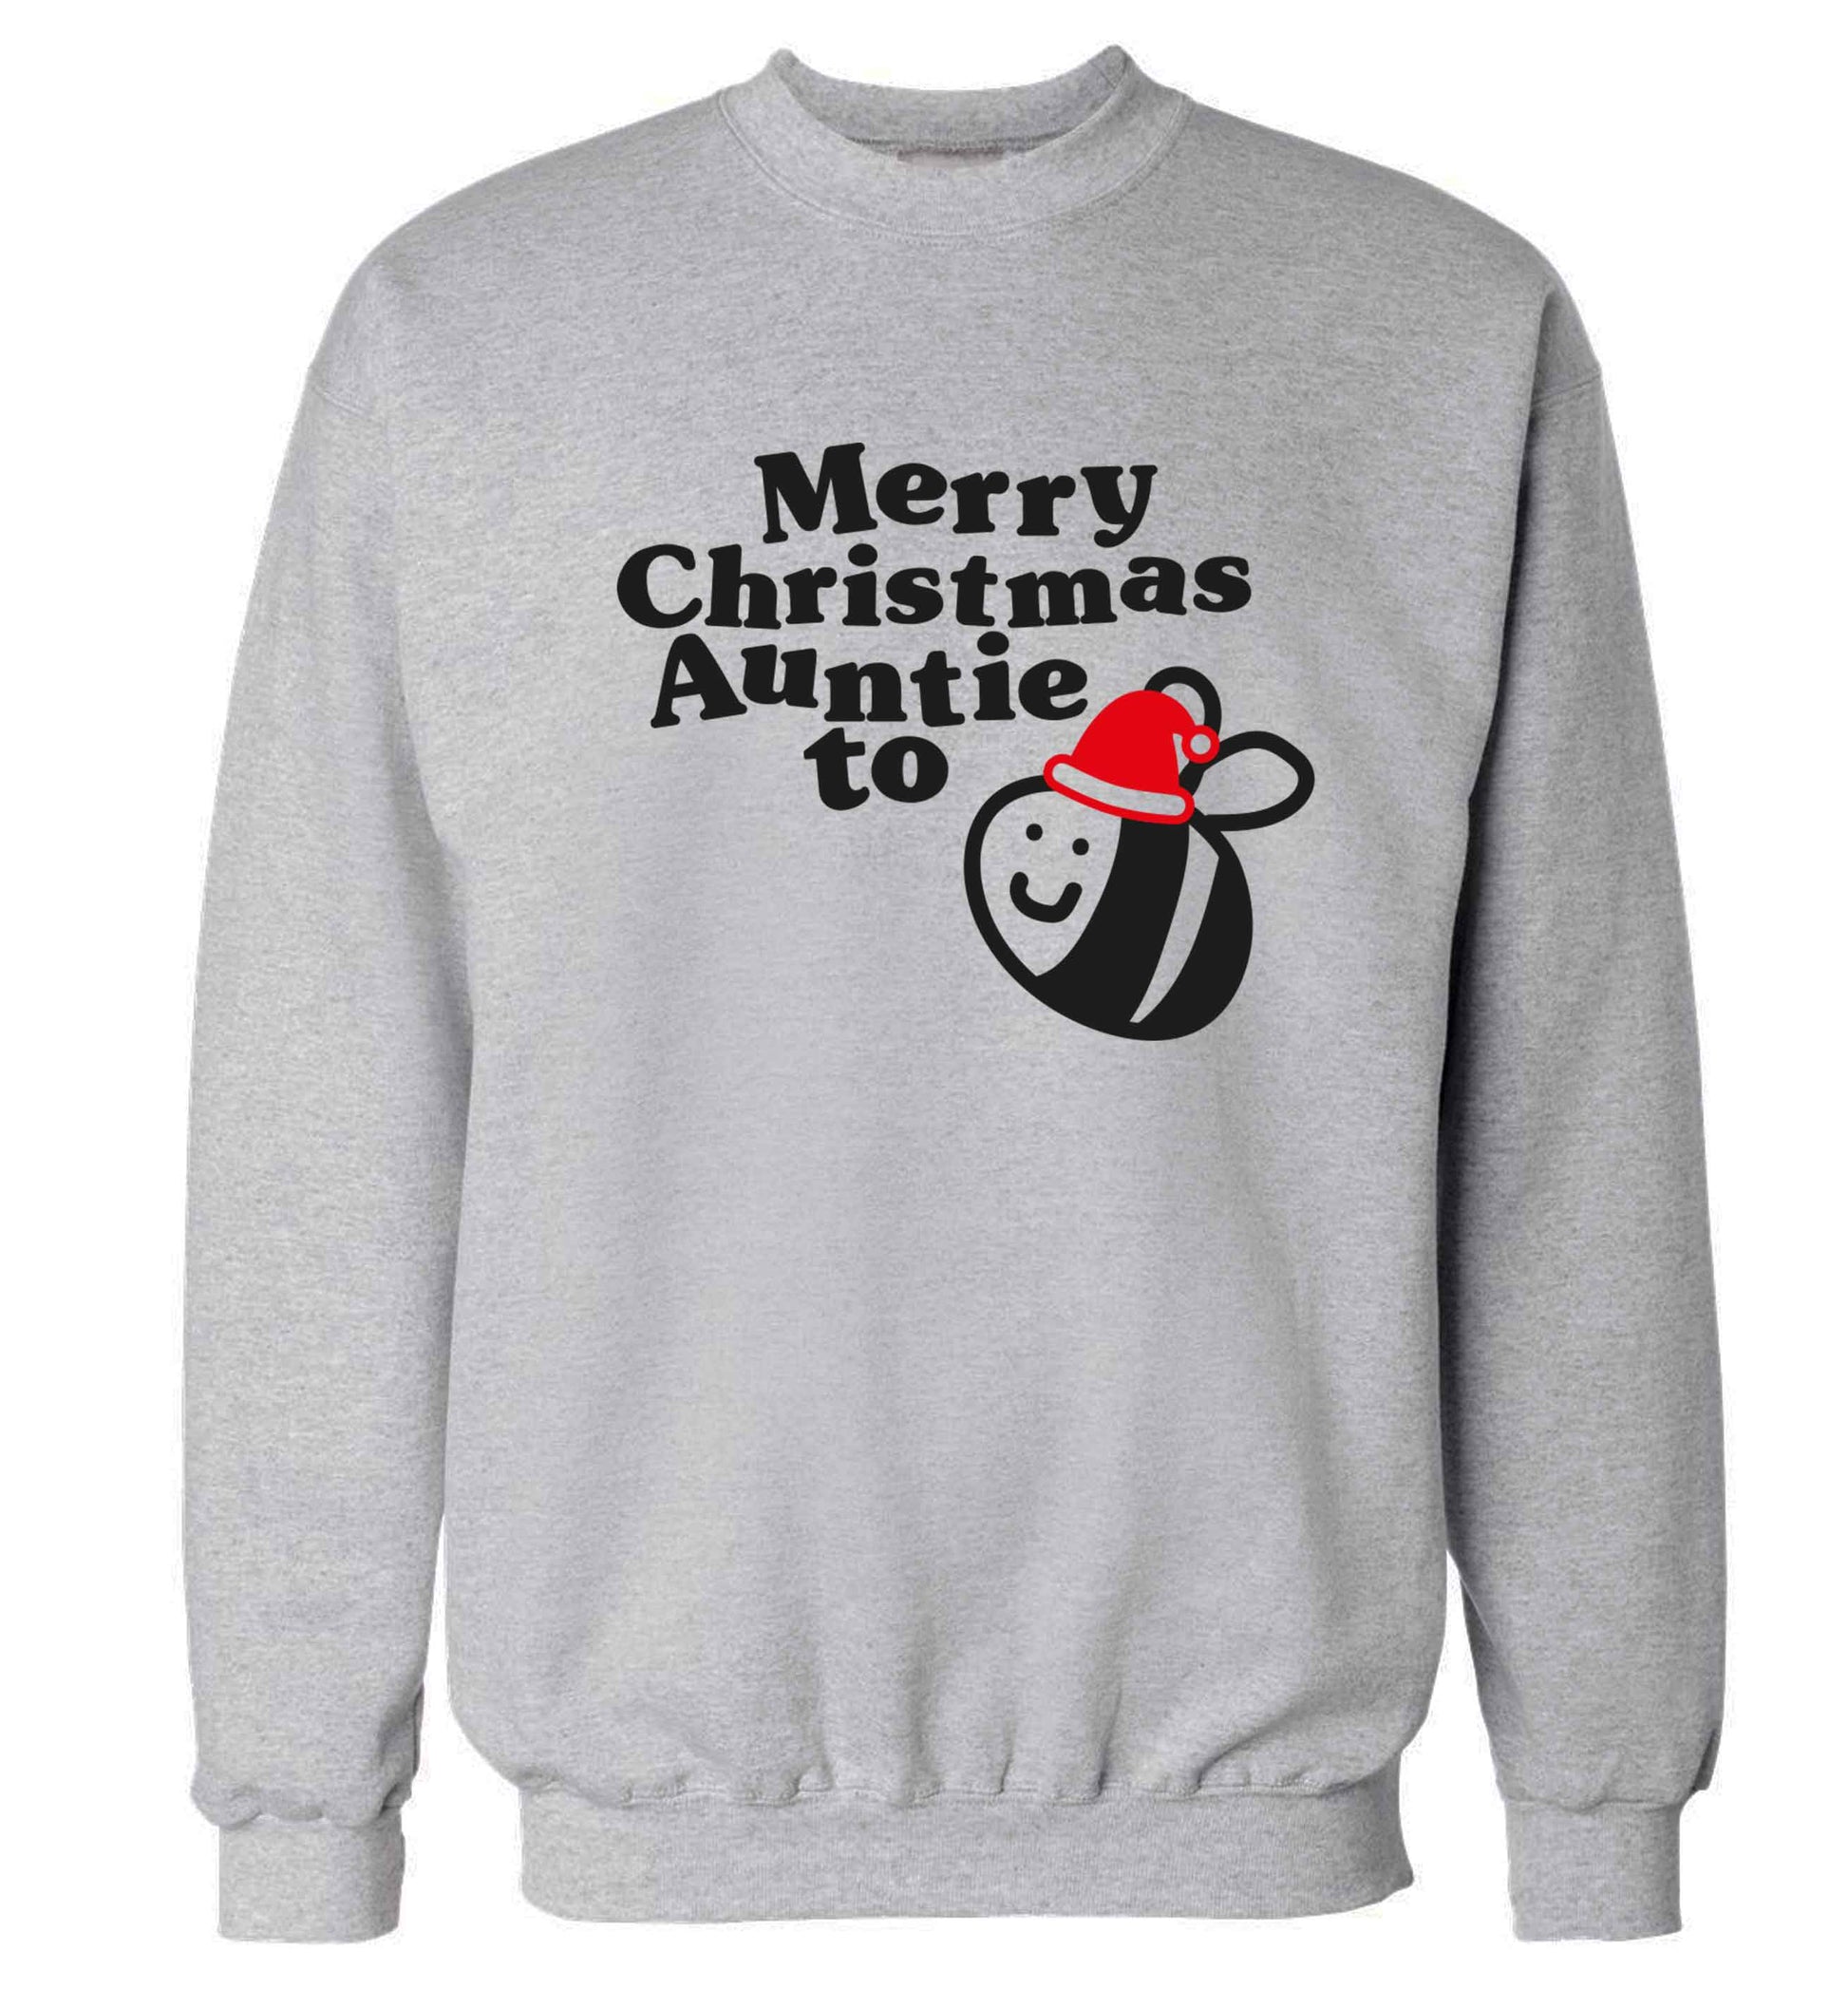 Merry Christmas auntie to be Adult's unisex grey Sweater 2XL